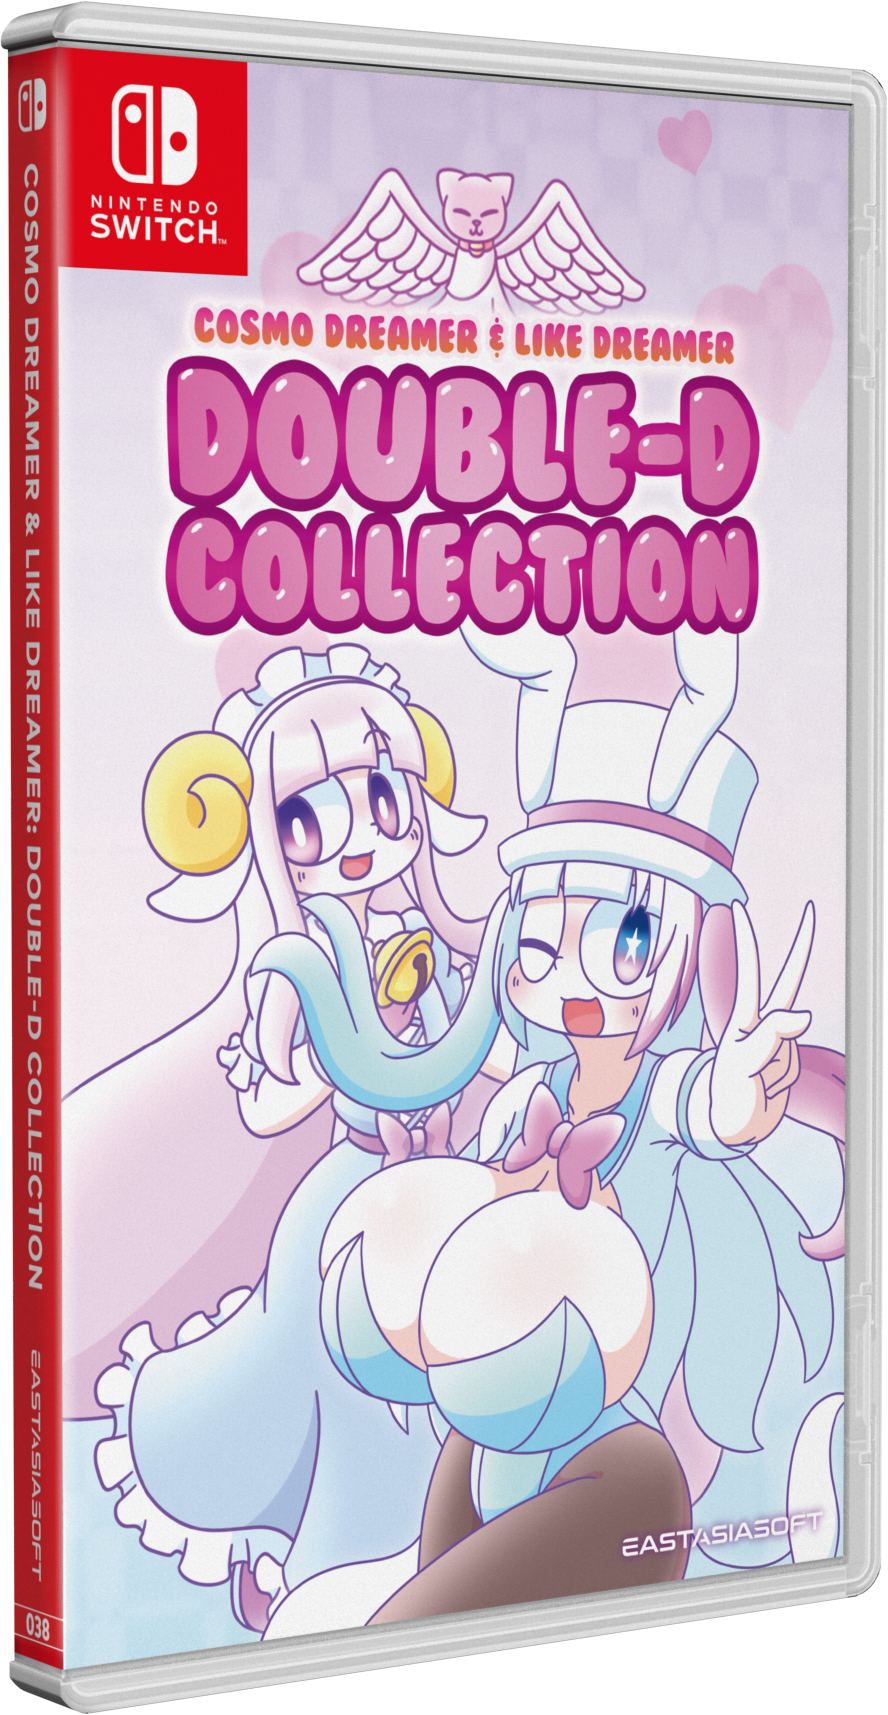 Cosmo Dreamer & Like Dreamer: Double-D Collection PLAY EXCLUSIVES 